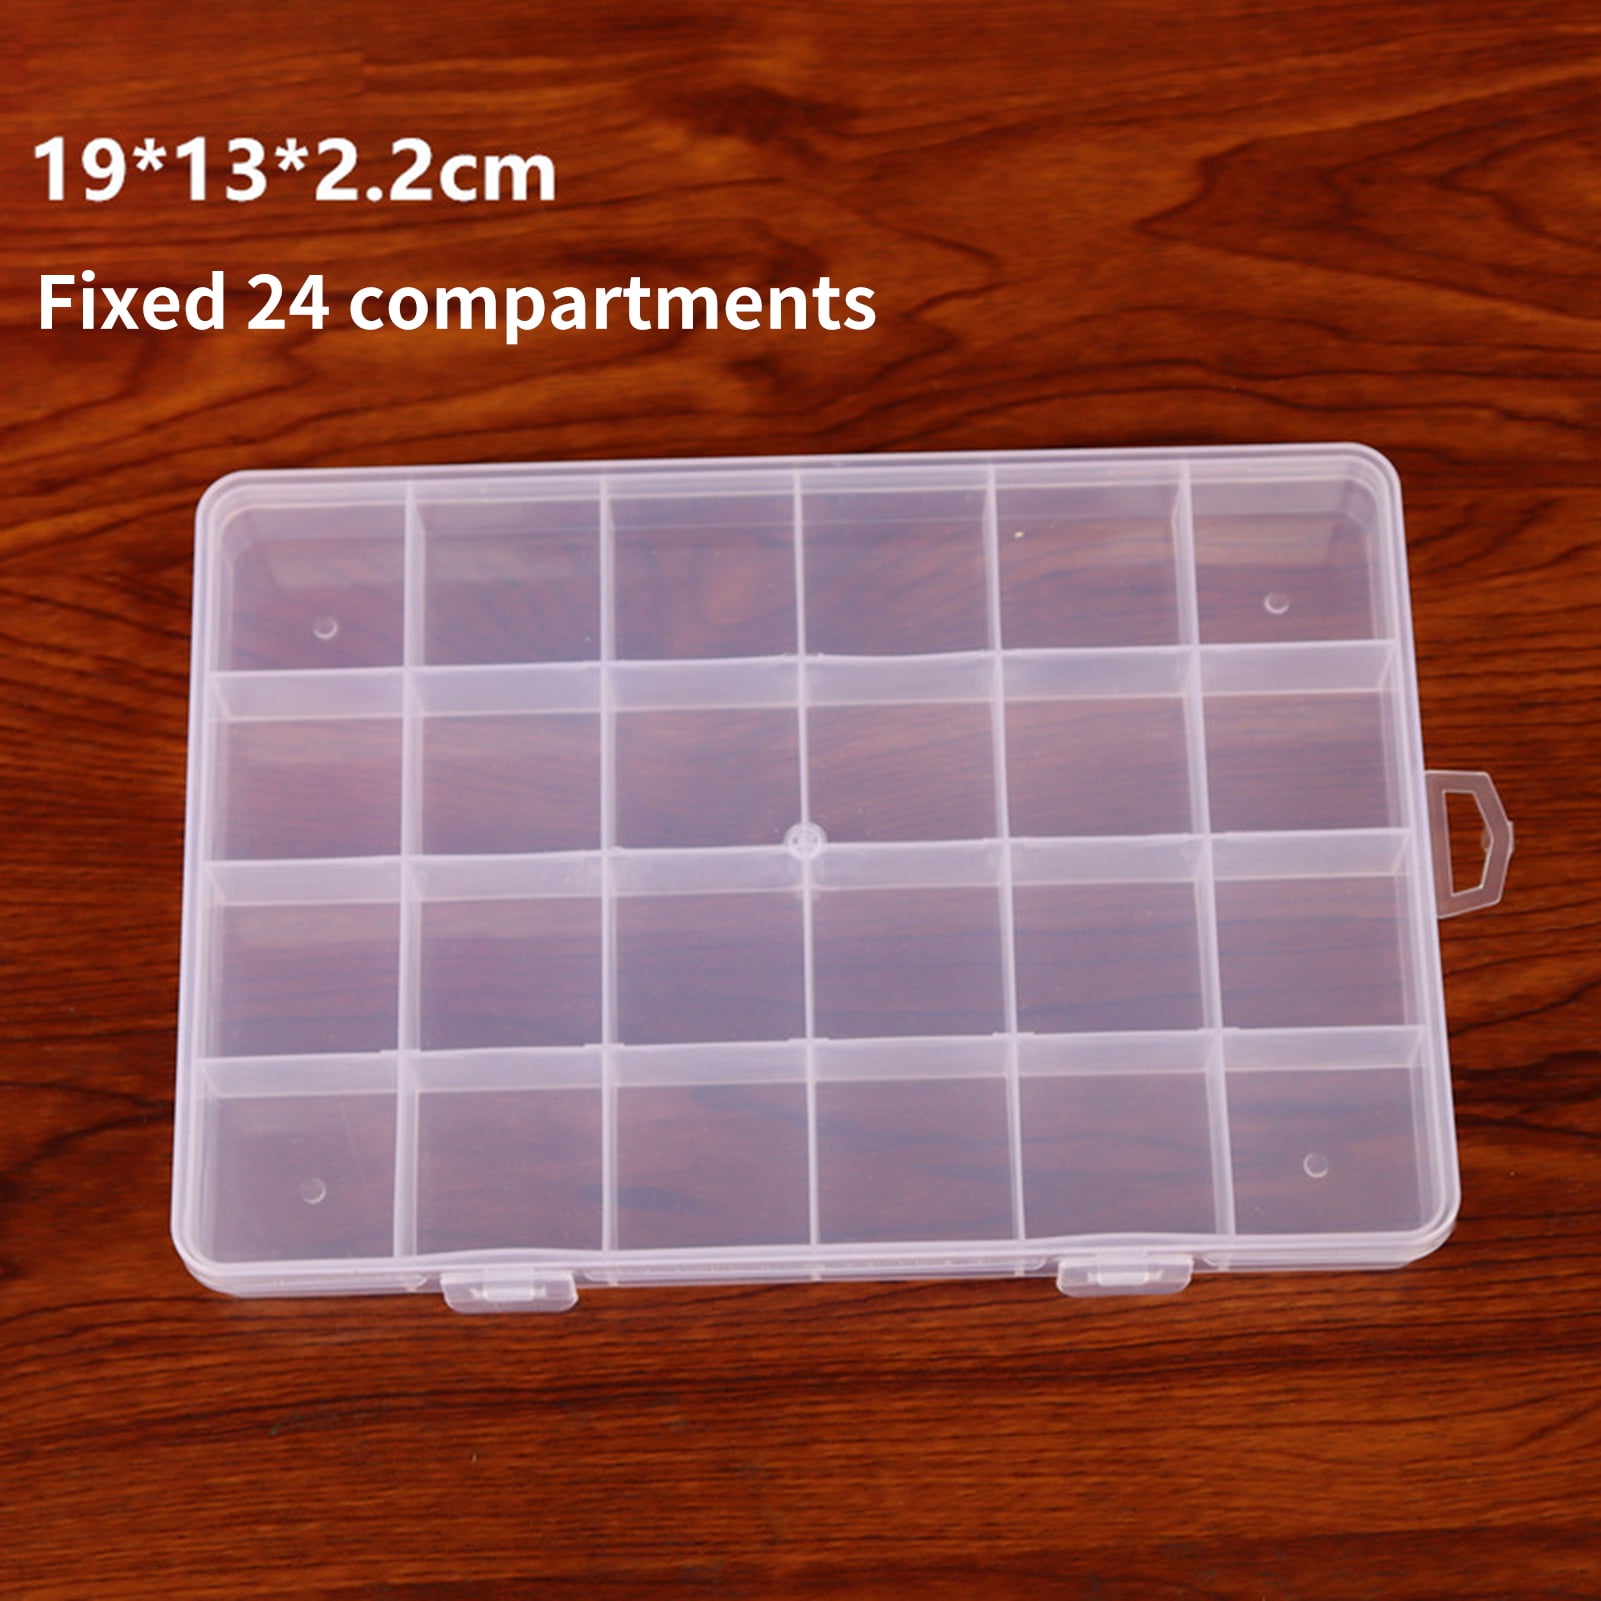 Tackle Box 24 Compartment Clear 10.7 x 7 x 1.75 Plastic Utility Storage Tray